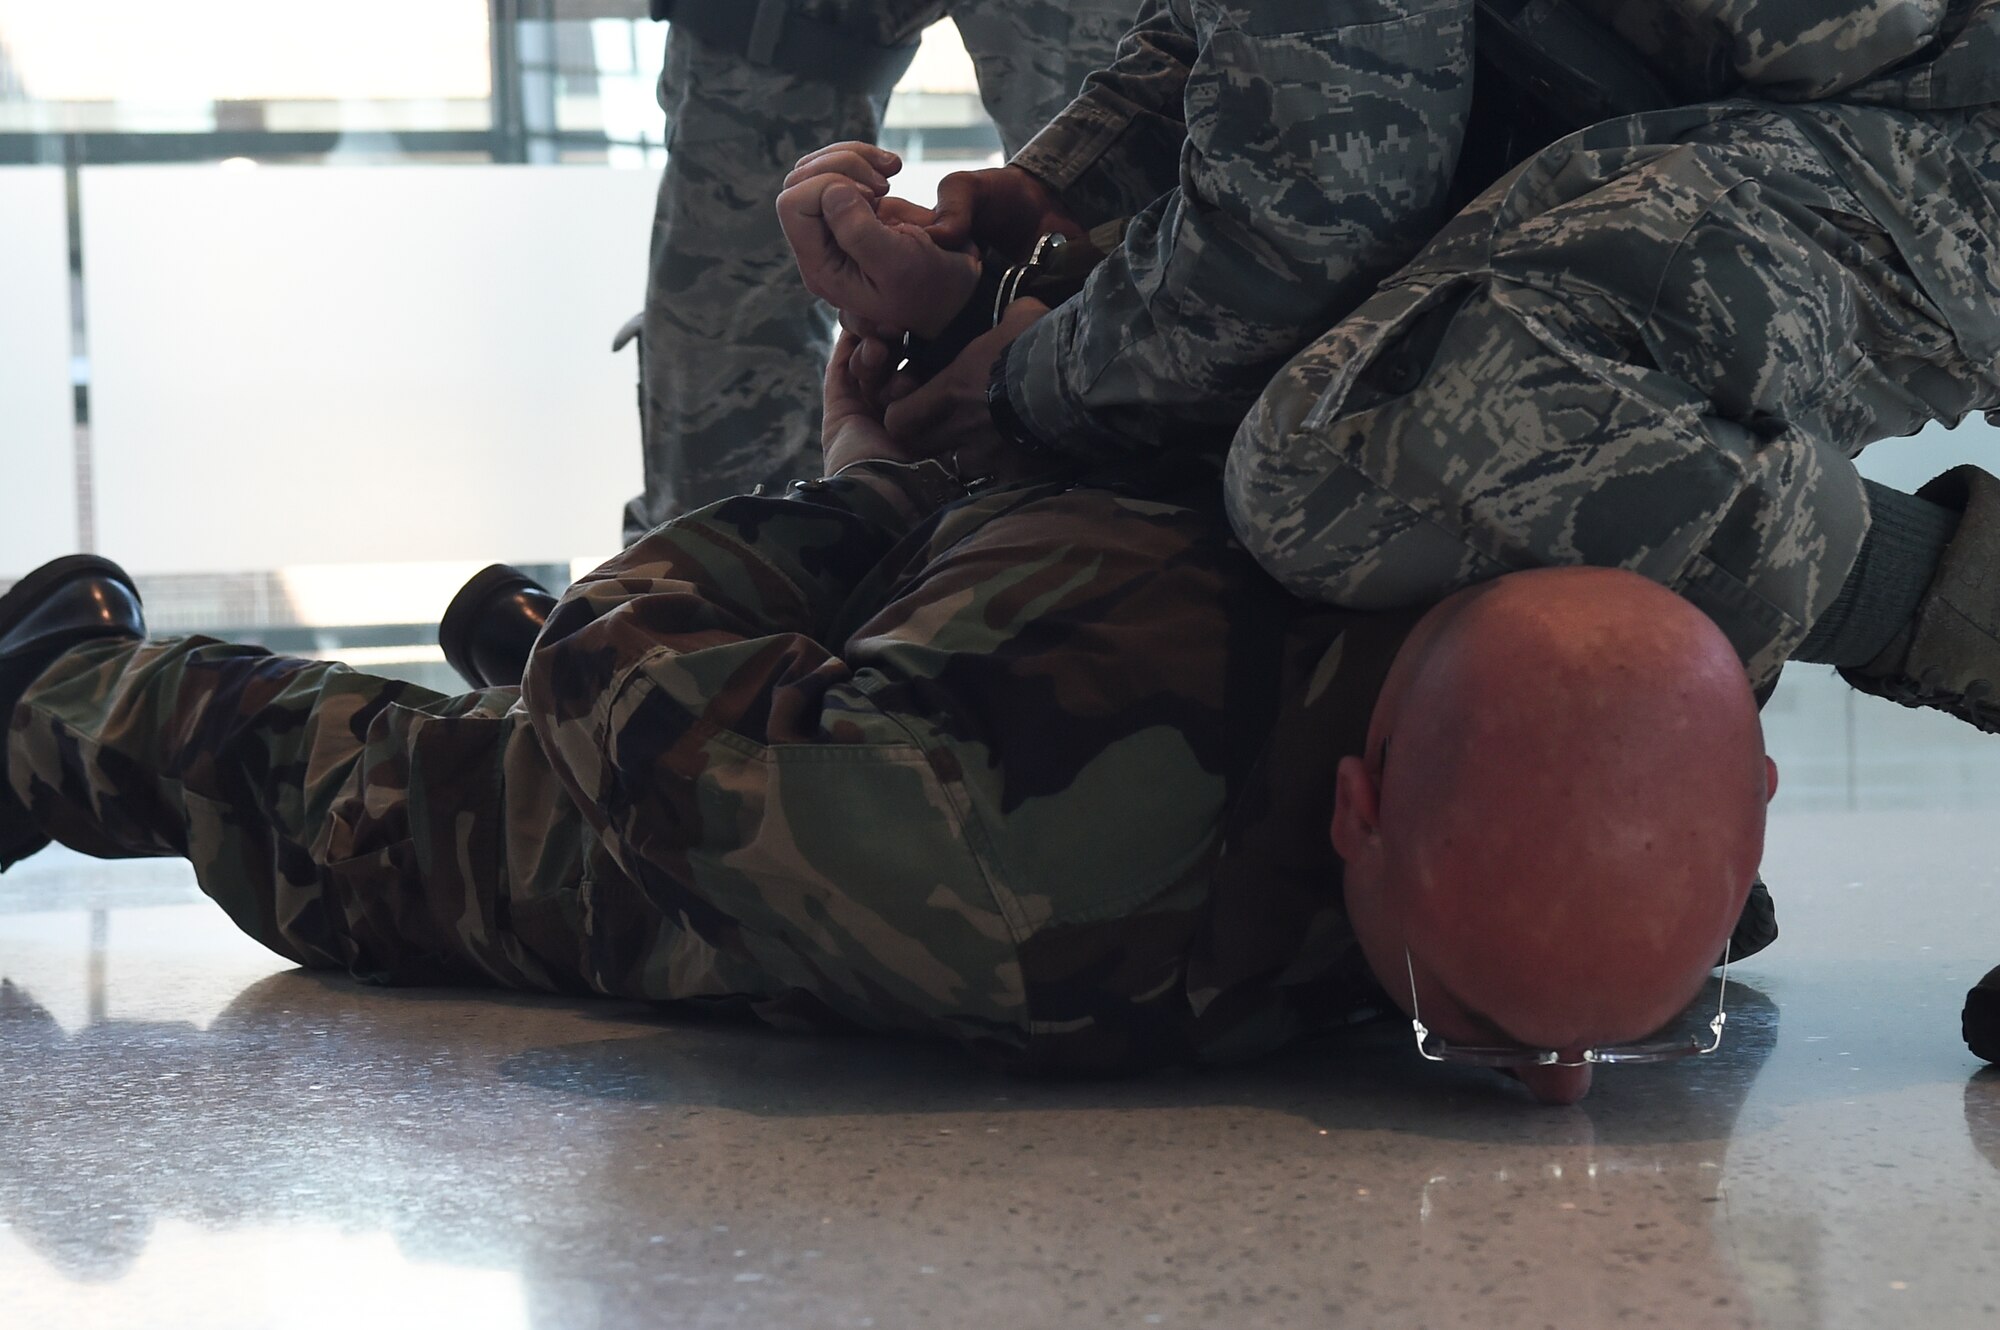 11th Security Forces Squadron Airmen arrest an active shooter during an exercise on Joint Base Andrews, Md., March 9, 2016. Exercise programs utilize dynamic interactive scenarios to evaluate proficiency in individual and team responses.(U.S. Air Force photo by Senior Airman Mariah Haddenham/Released)